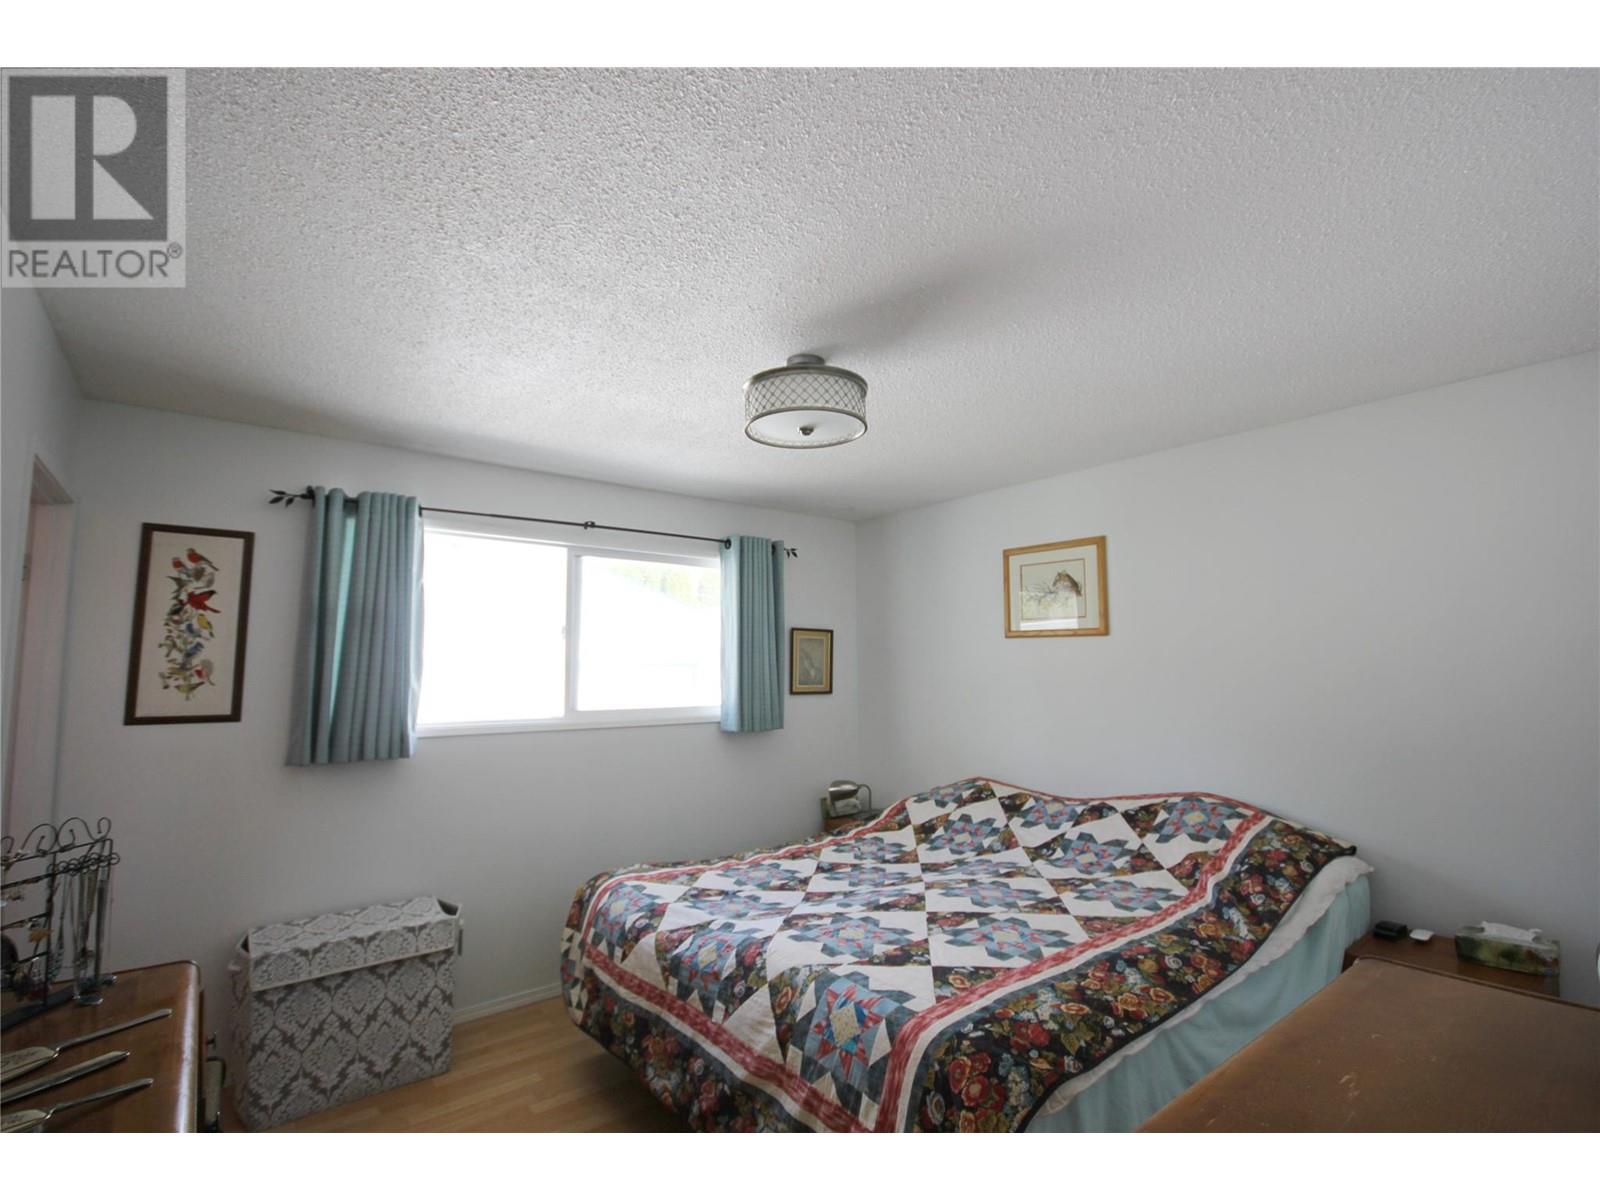 365 Pineview Road, Penticton, British Columbia  V2A 7S2 - Photo 14 - 10310379